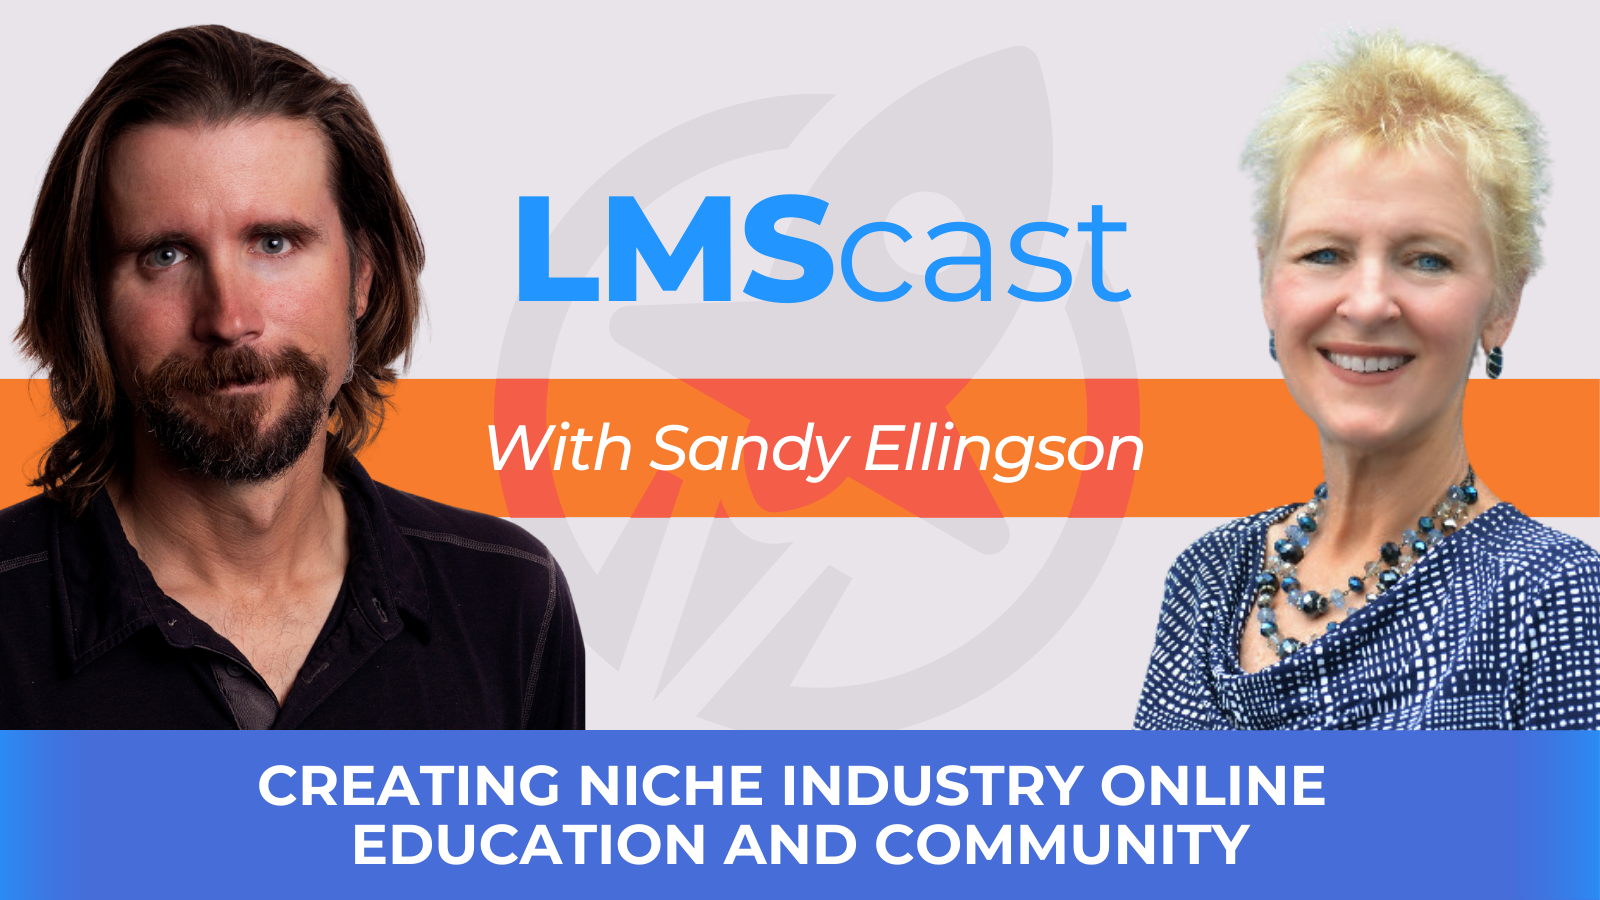 Creating Niche Industry Online Education and Community with Sandy Ellingson